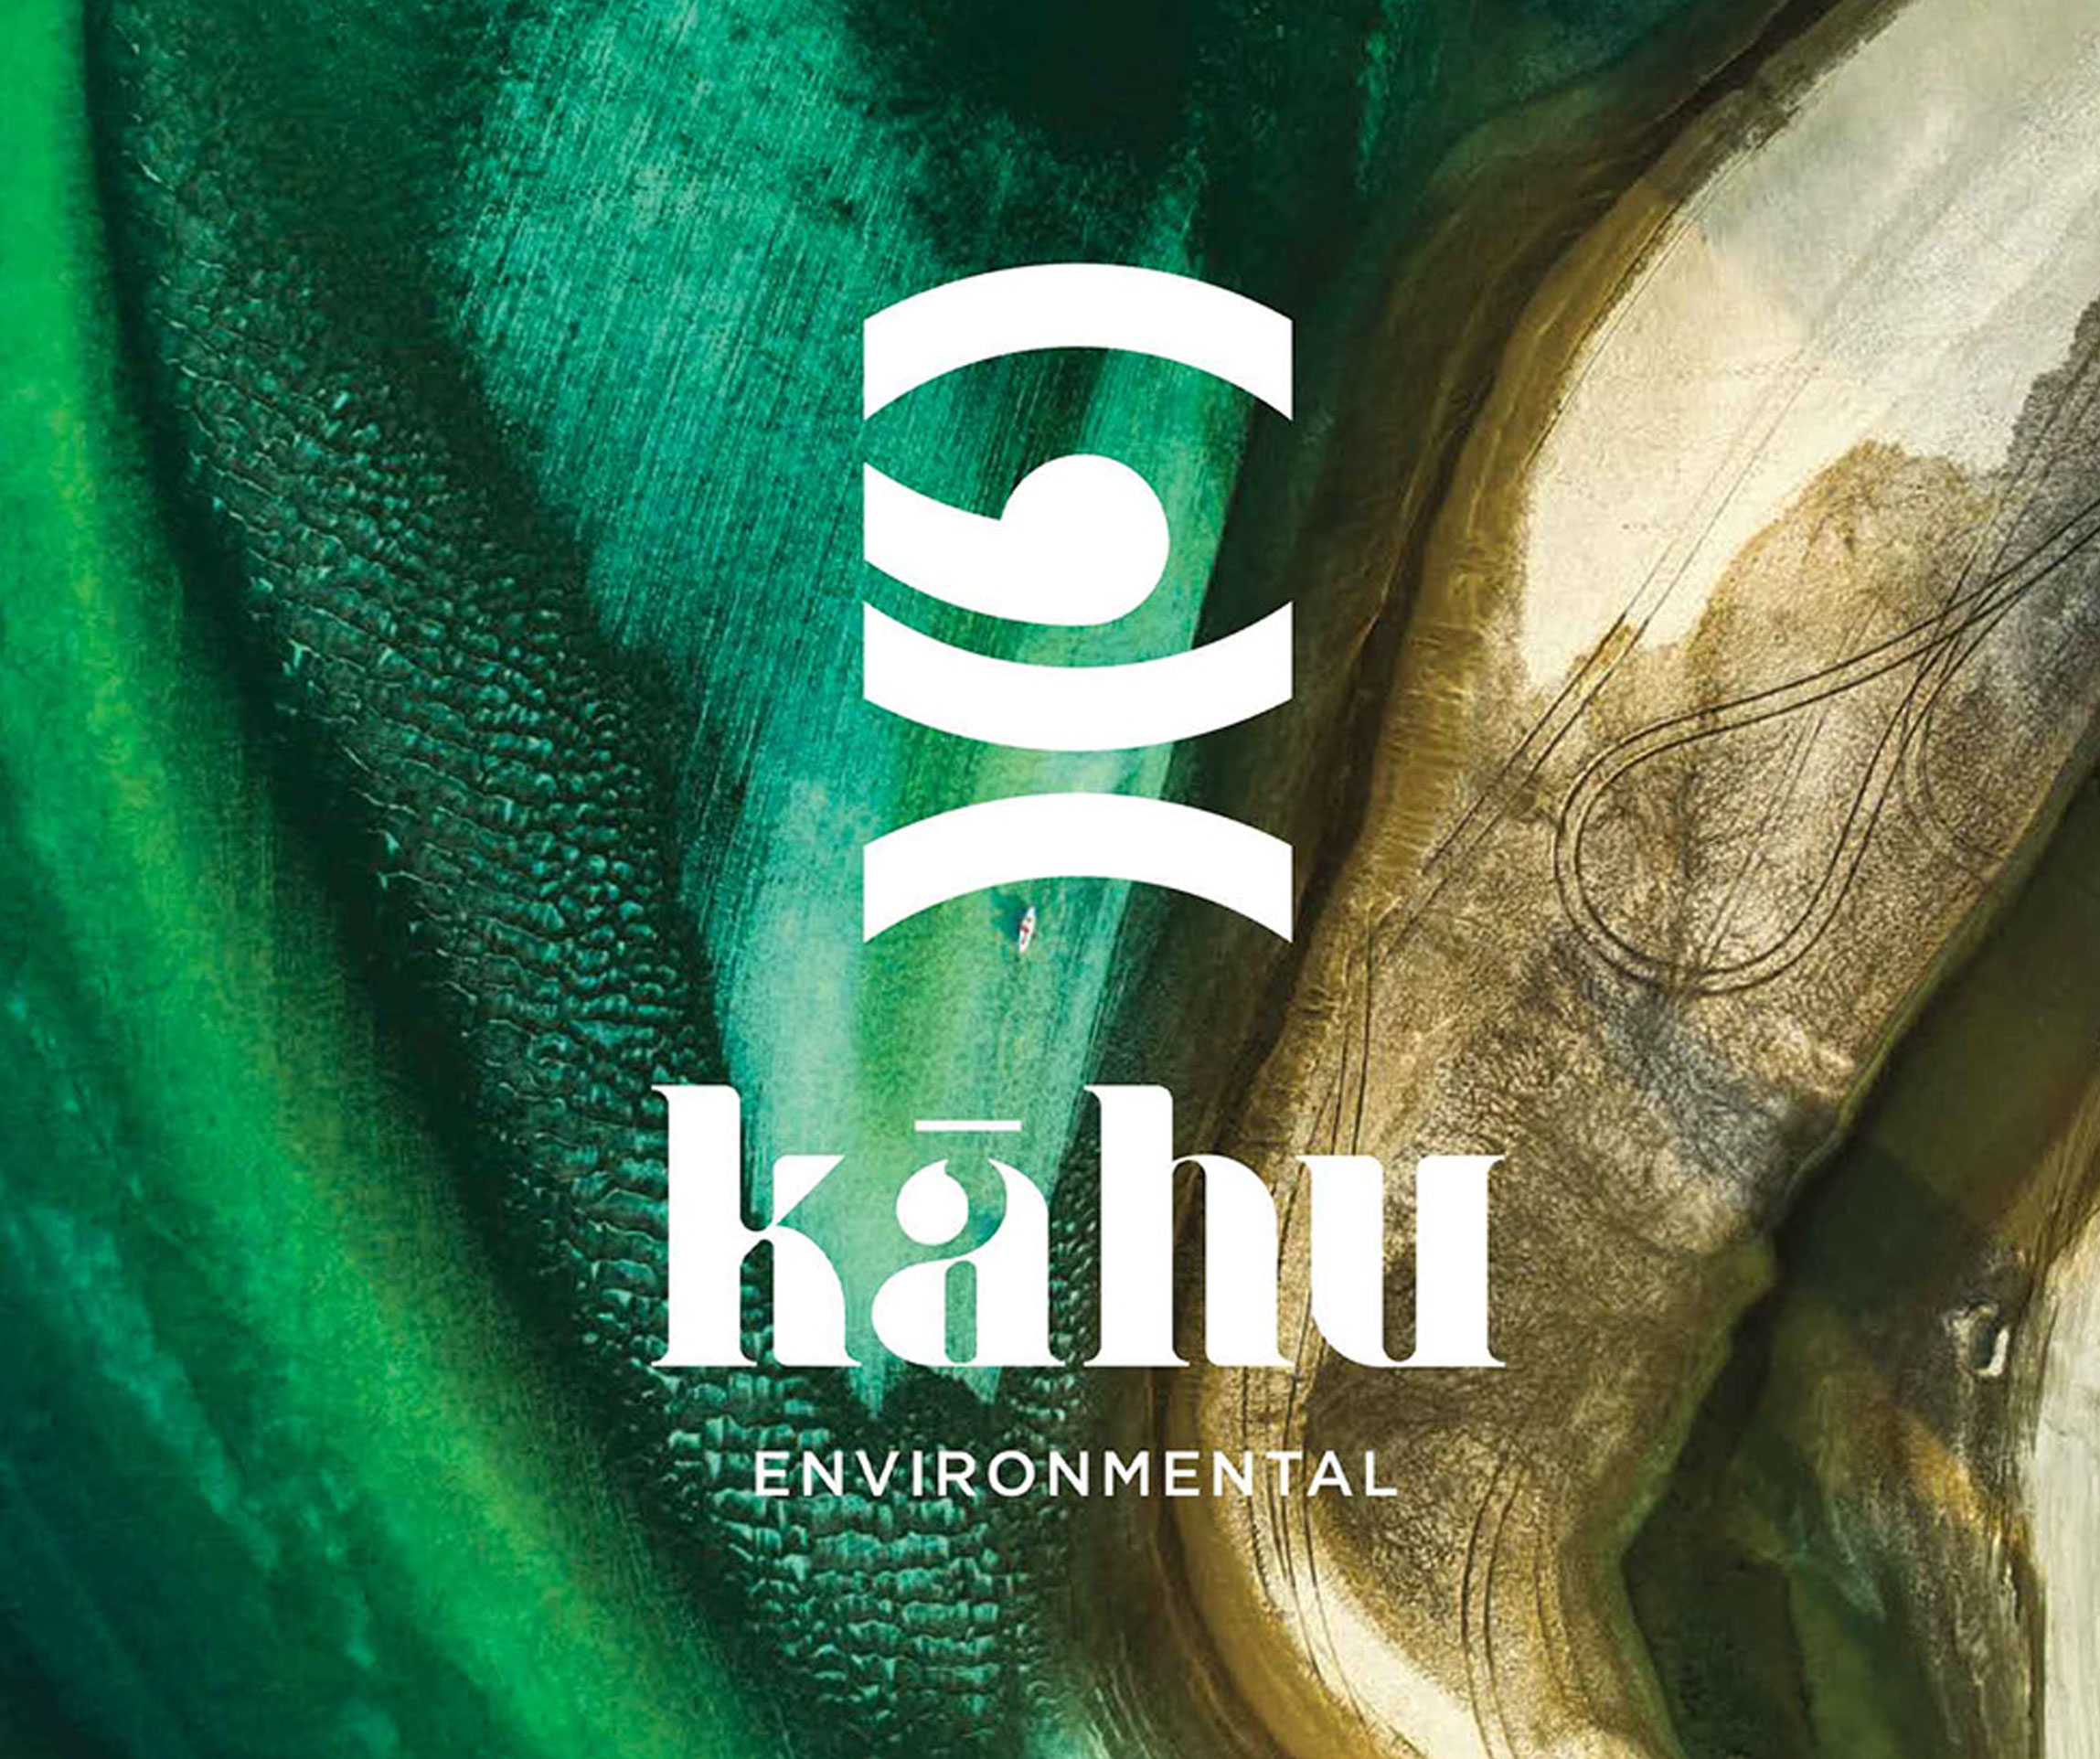 Kahu Environmental, Sustainable connections with the environment